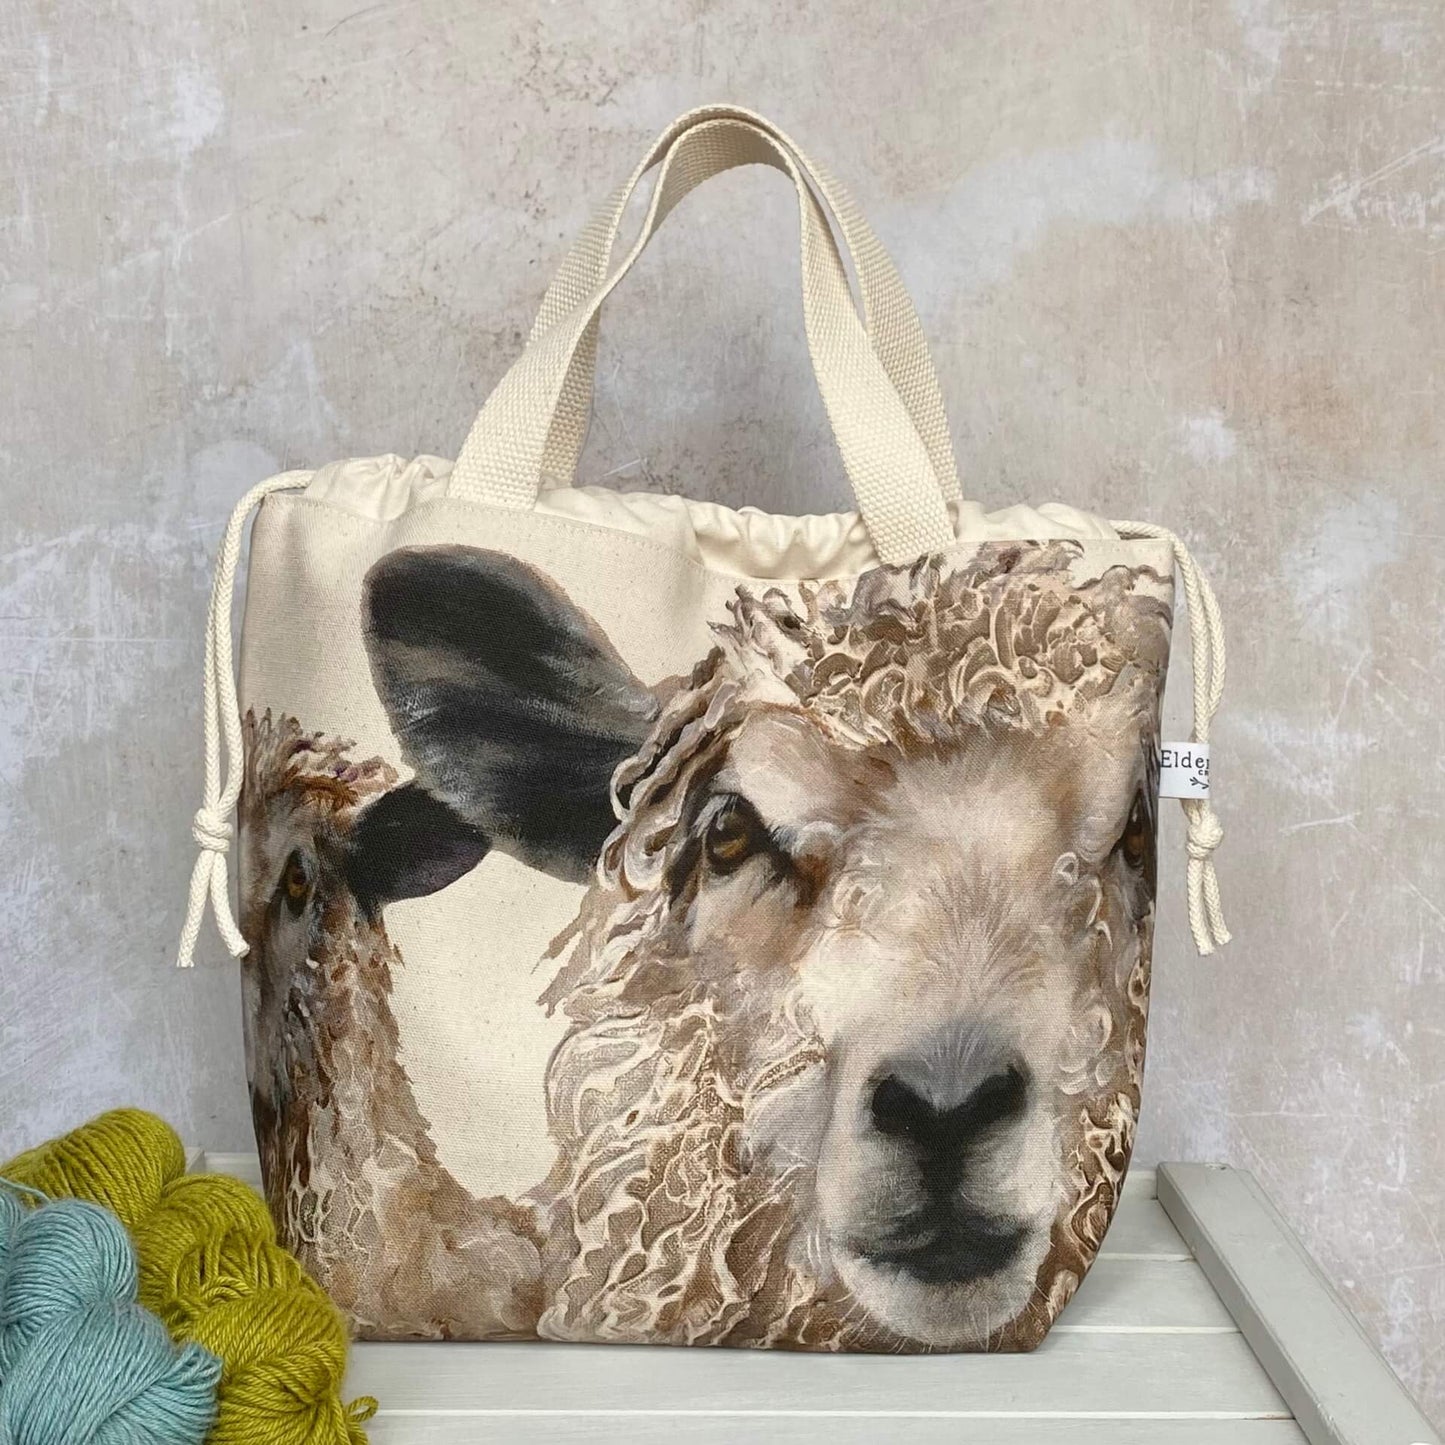 Sheep knitting project bag for large tips. The bag is made from a fabric that features two large sheep faces and is sitting on a bench with two skeins of yarn.